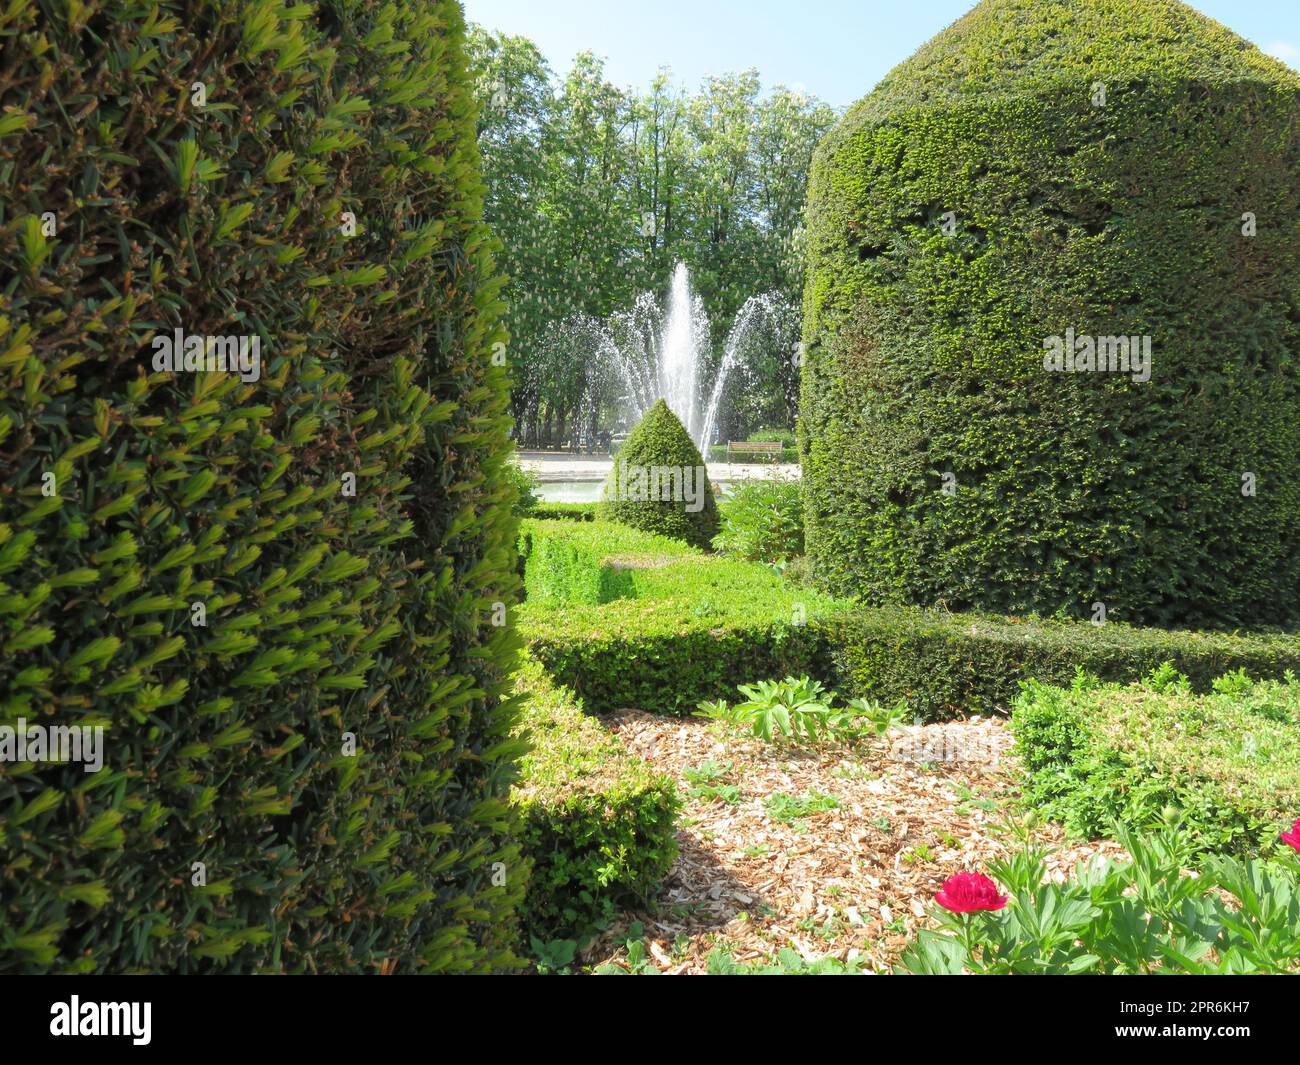 beautiful landscape of well-kept gardens with worked hedges Stock Photo